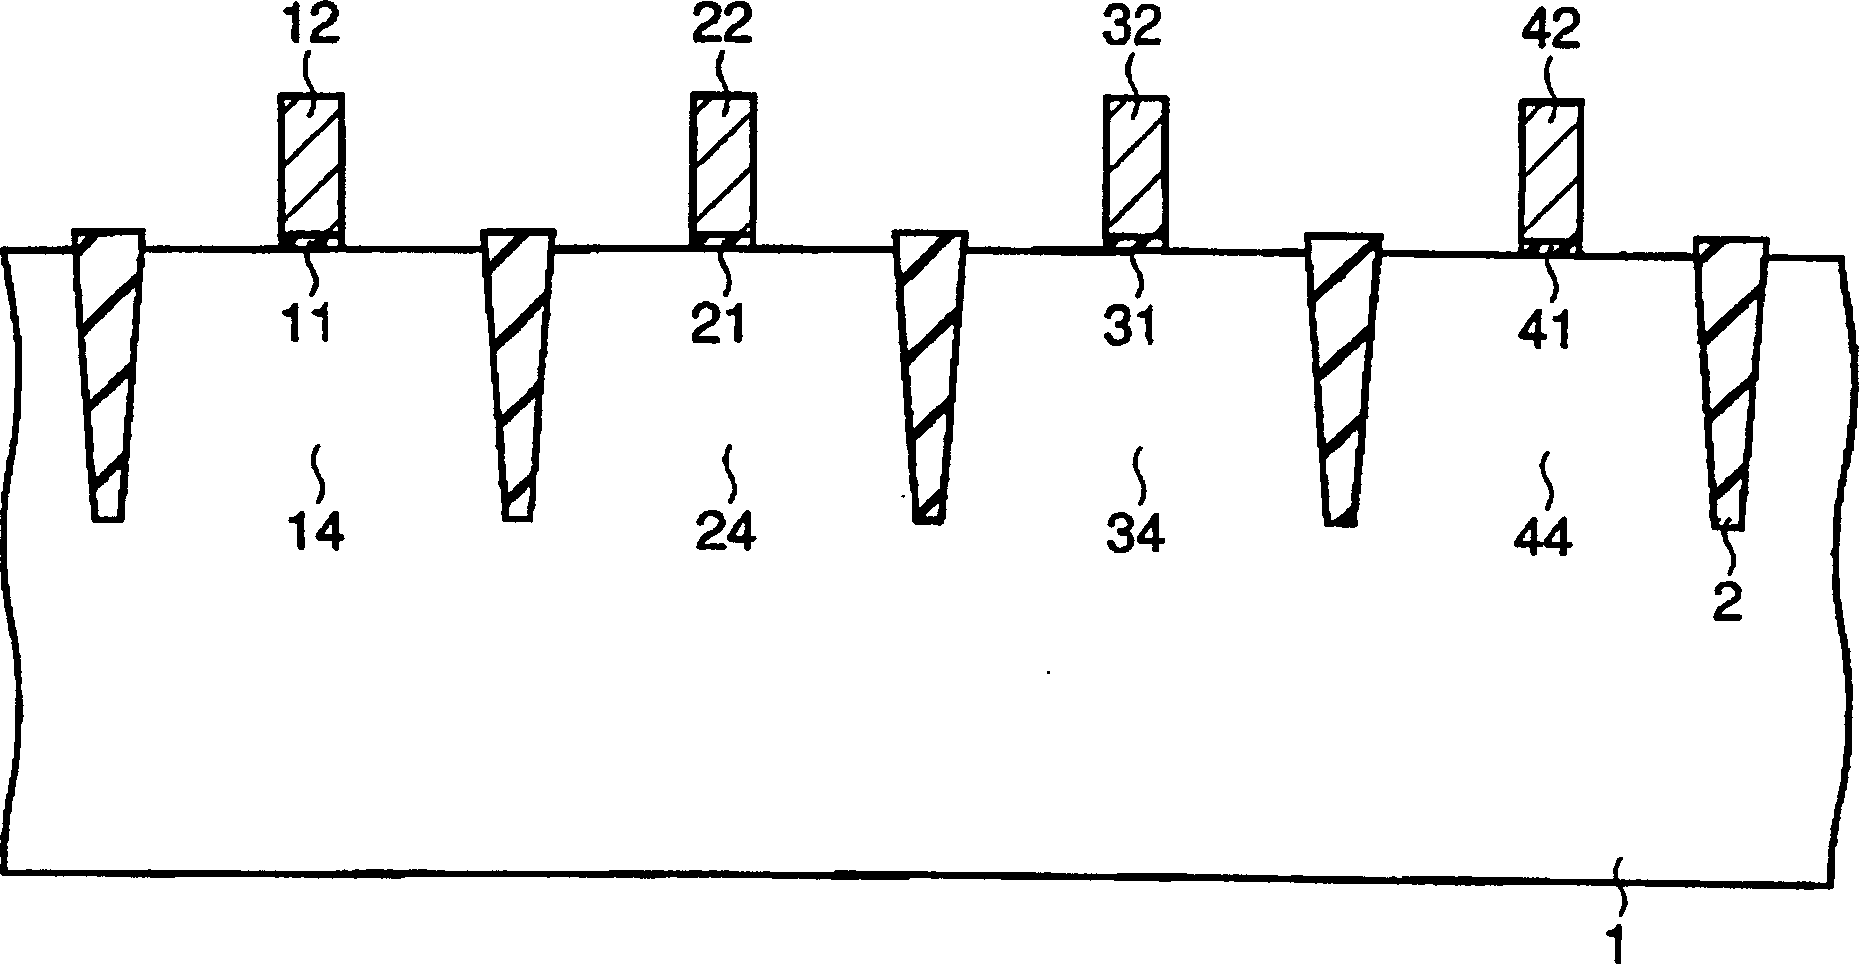 Manufacture of semiconductor device